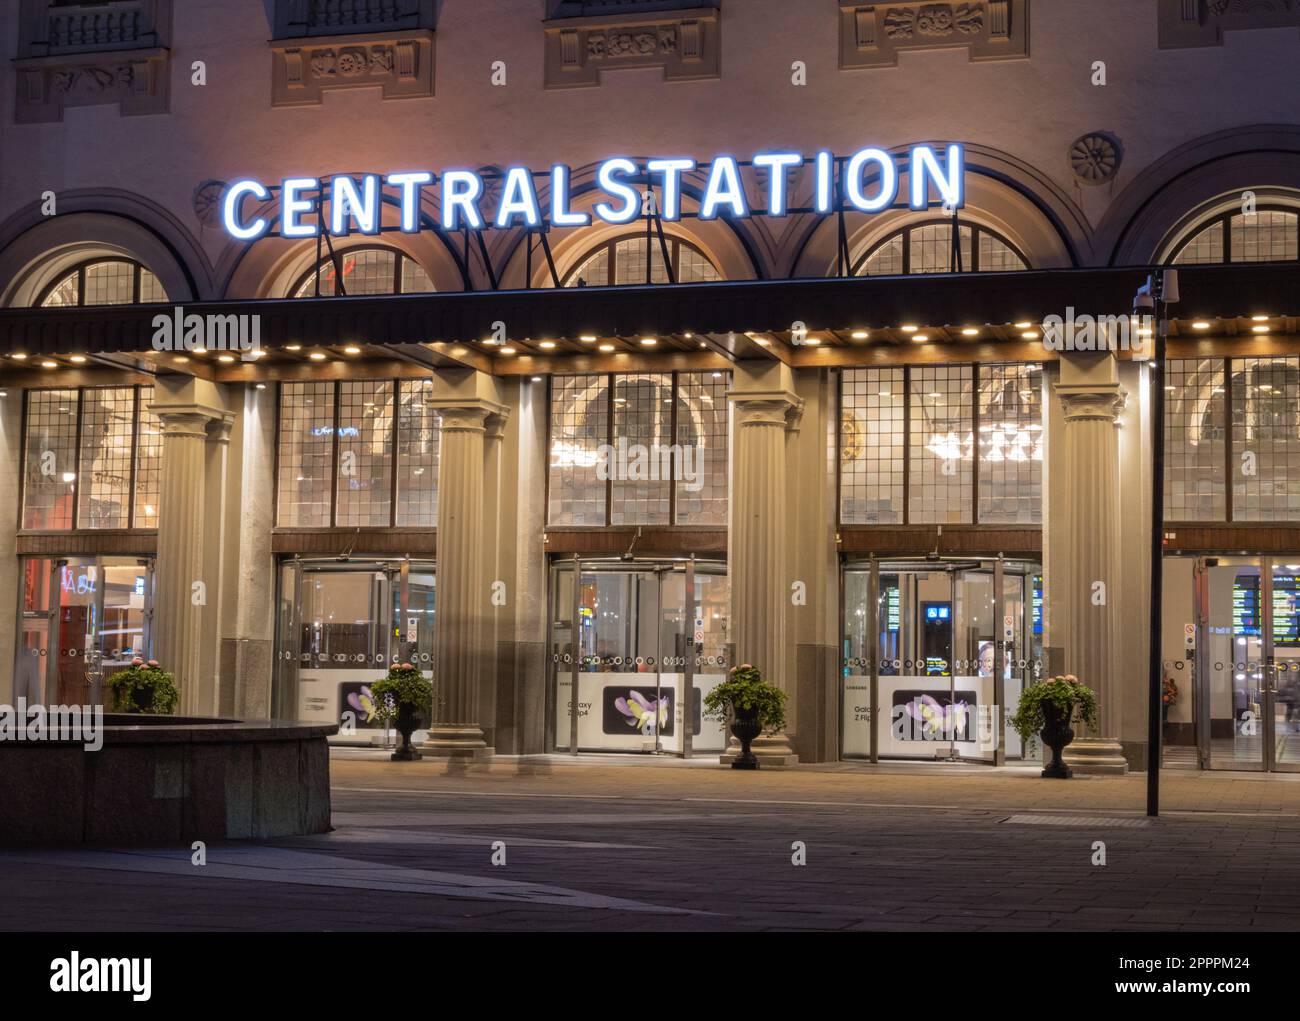 Stockholm, Sweden - 22 September, 2022: The majestic Stockholm Central Station stands illuminated in the evening, a beautiful example of Swedish archi Stock Photo